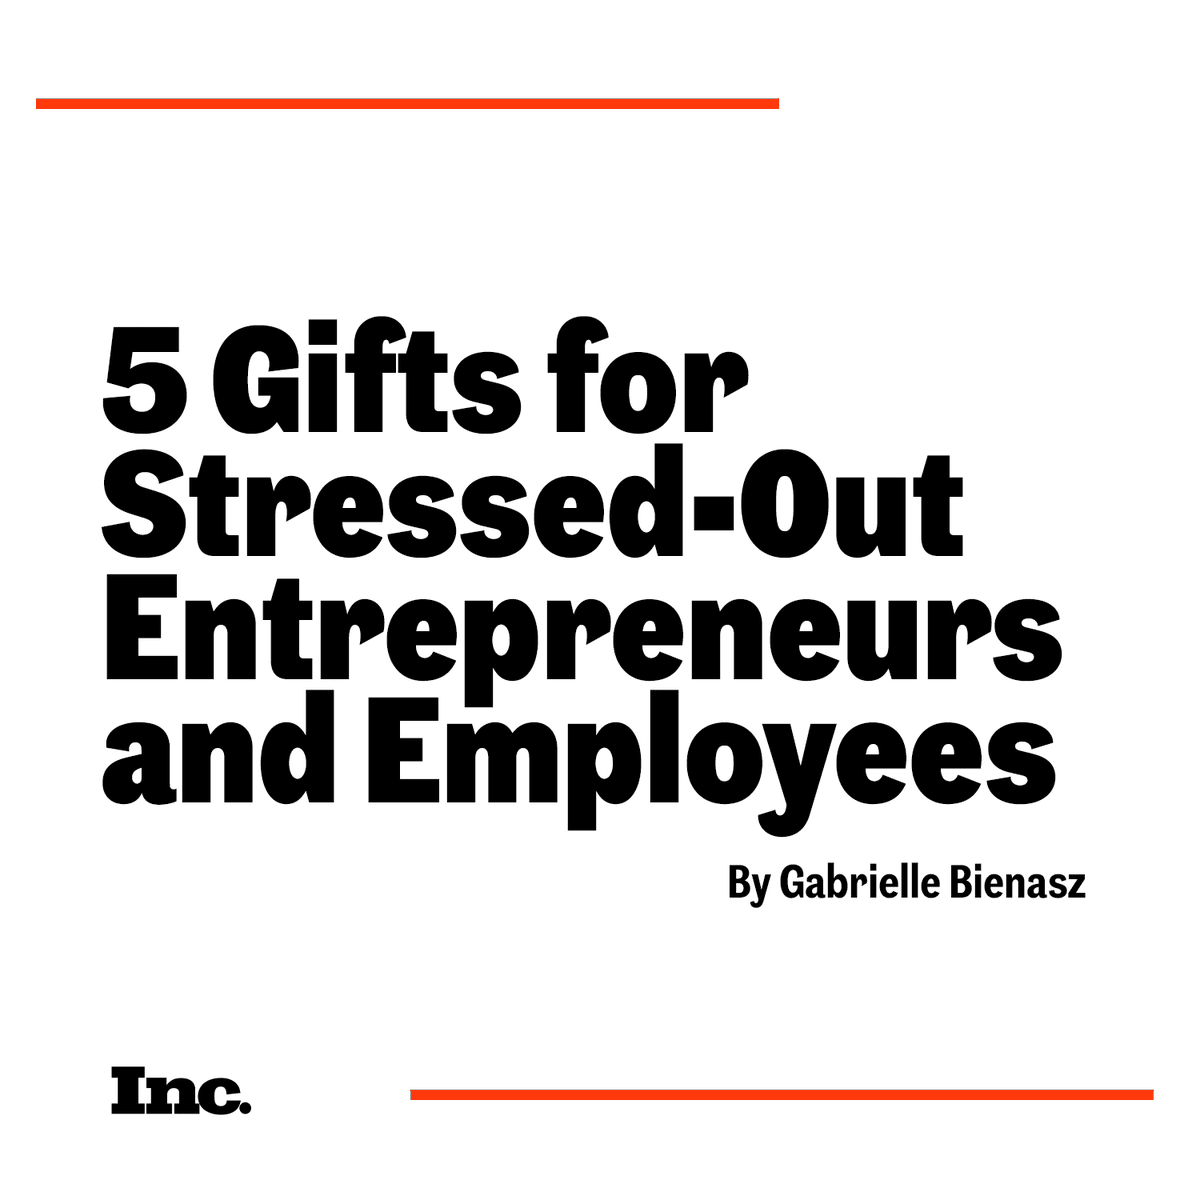 5 gifts you can give members of your team, other business owners, or even yourself to help provide some relaxation.